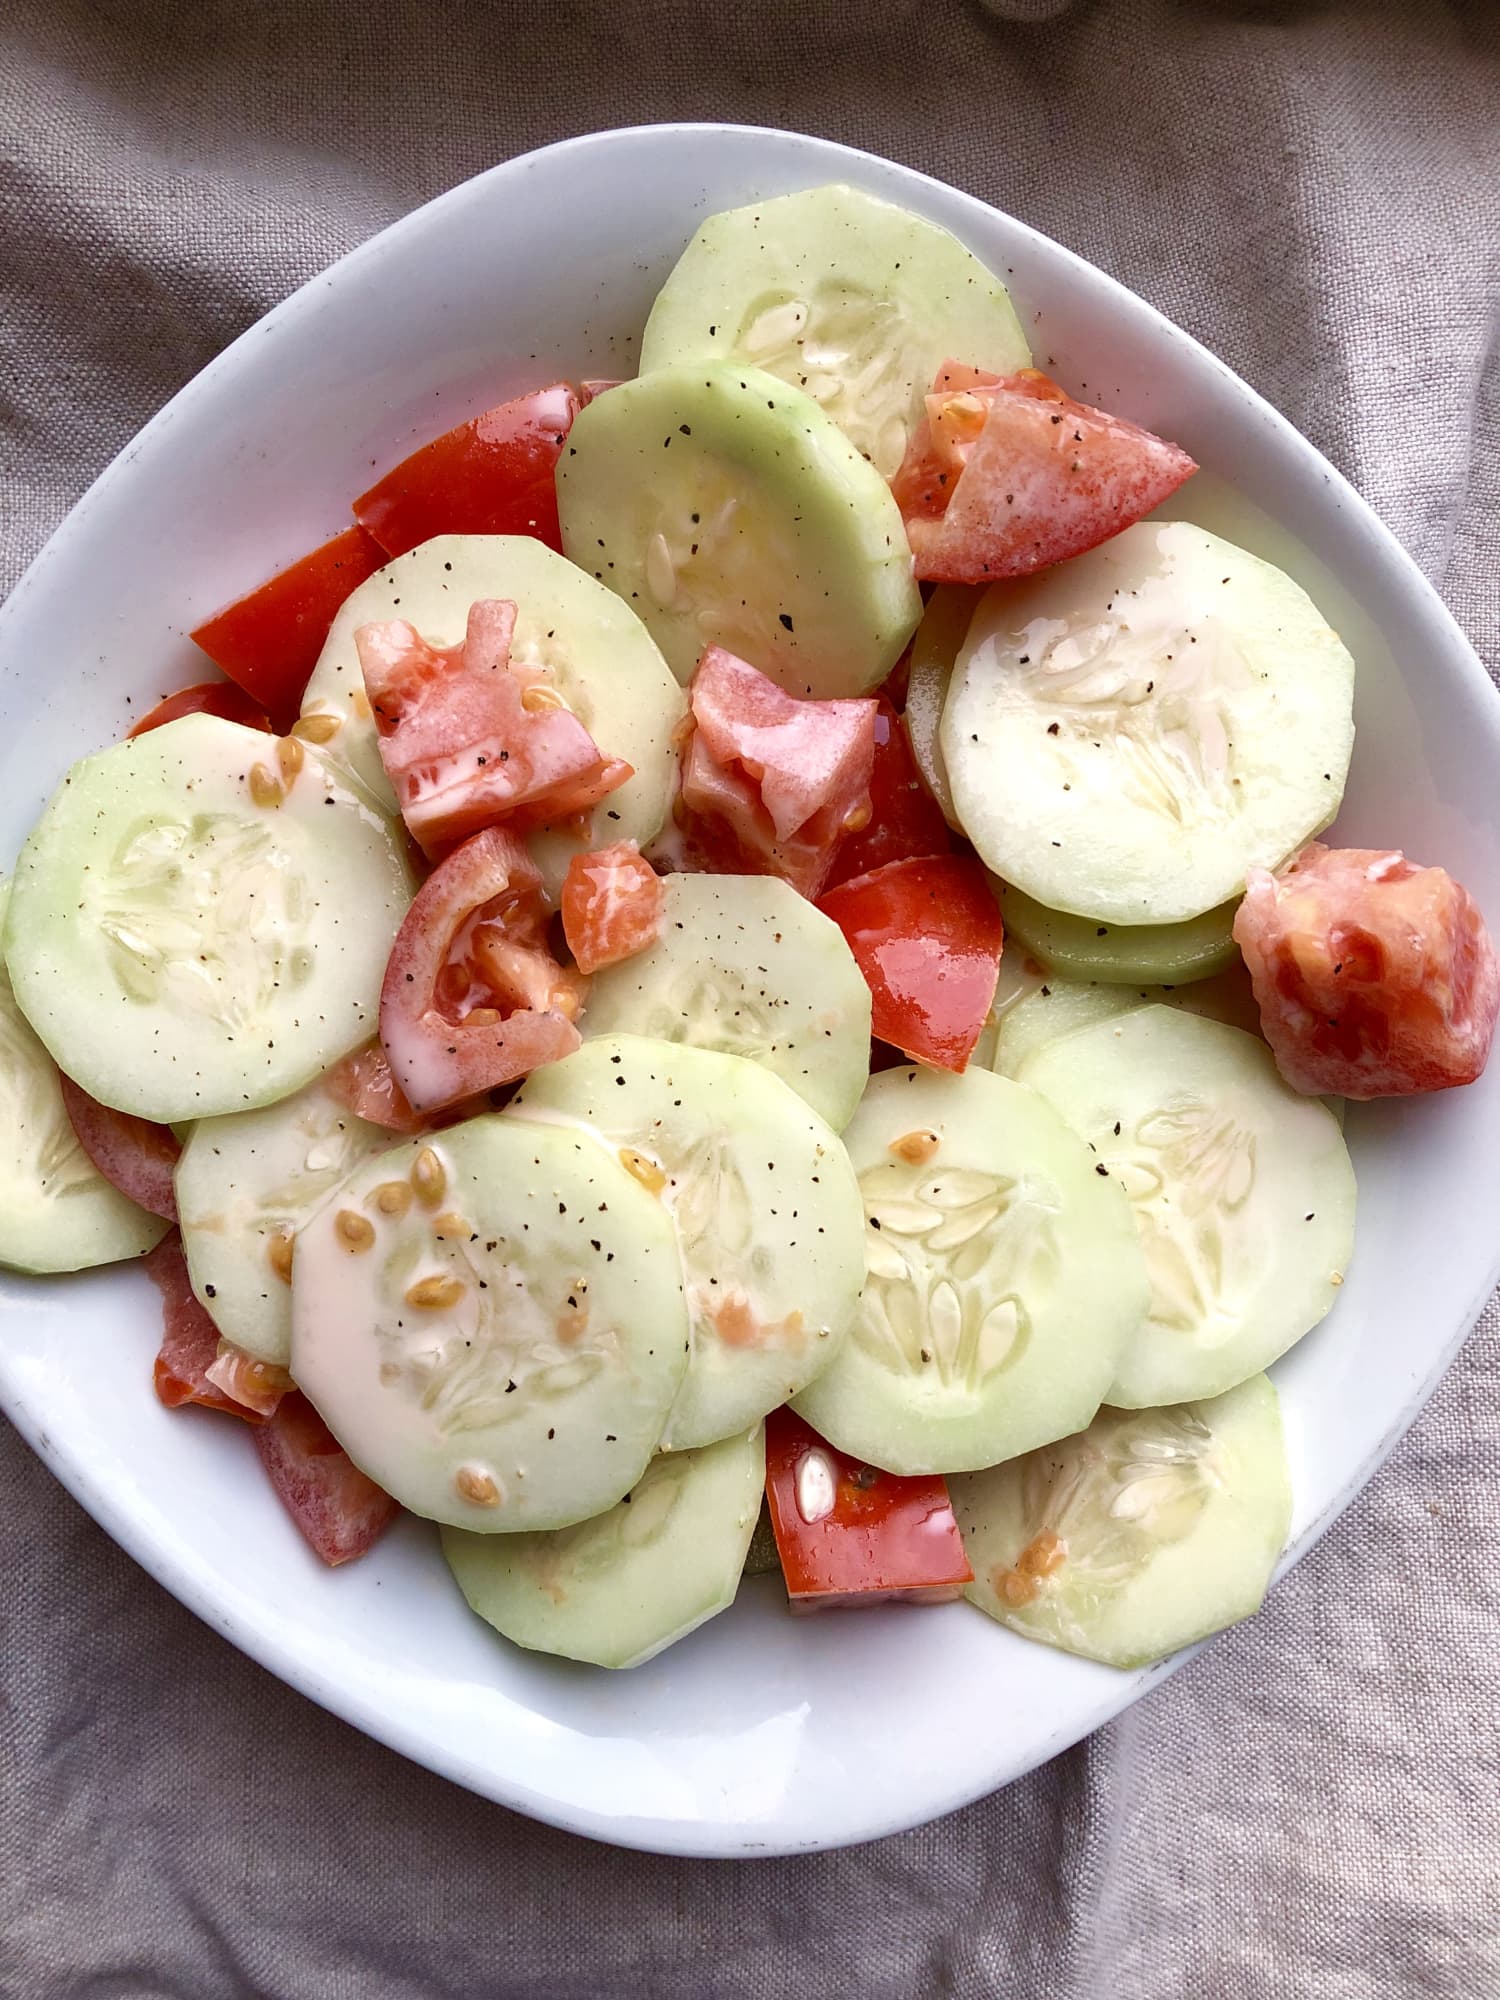 The Insanely Good Creamy Cucumber Salad I Keep Coming Back To